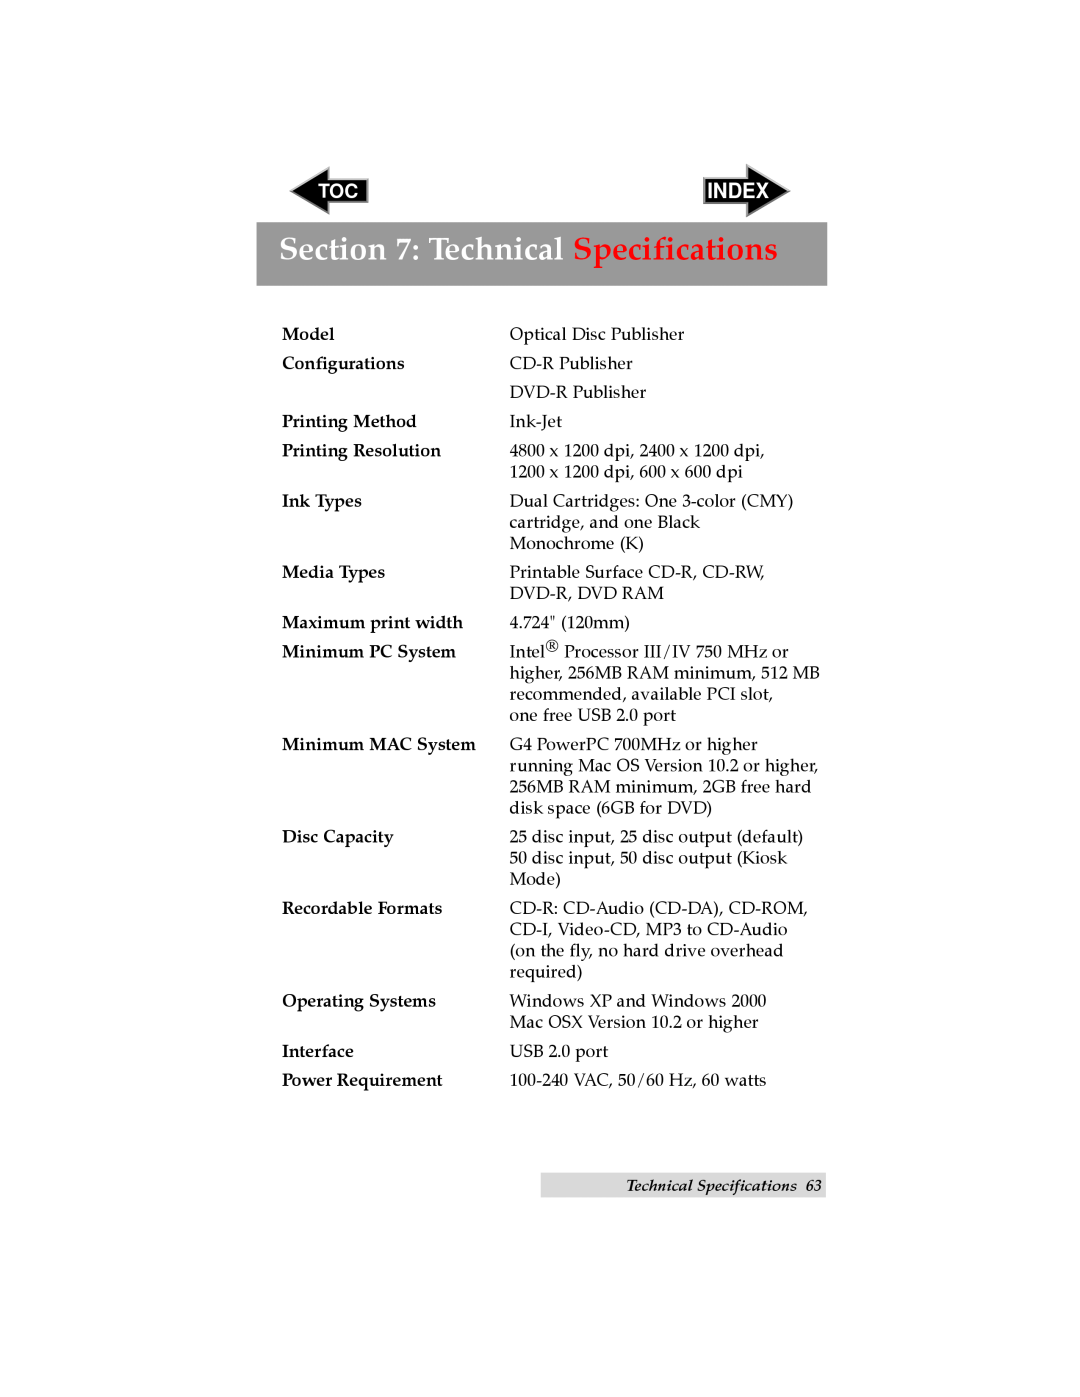 Primera Technology II user manual Technical Specifications, Index 